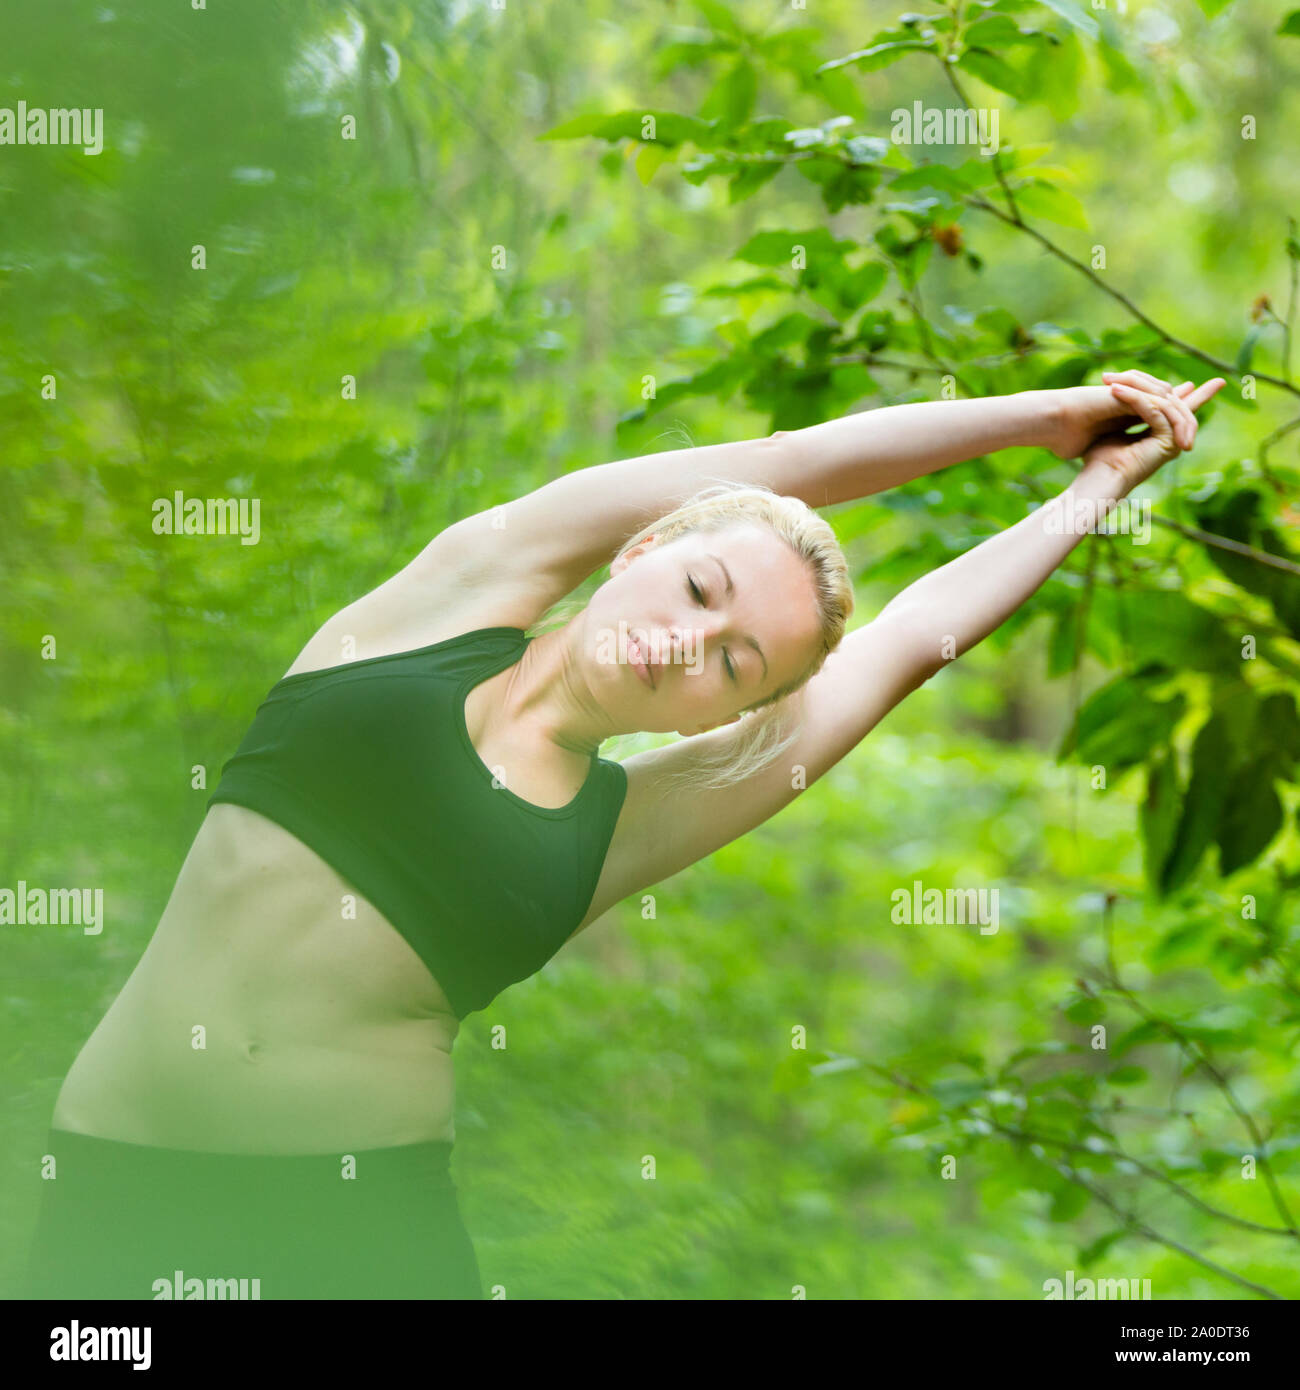 Lady practicing yoga in the nature. Stock Photo